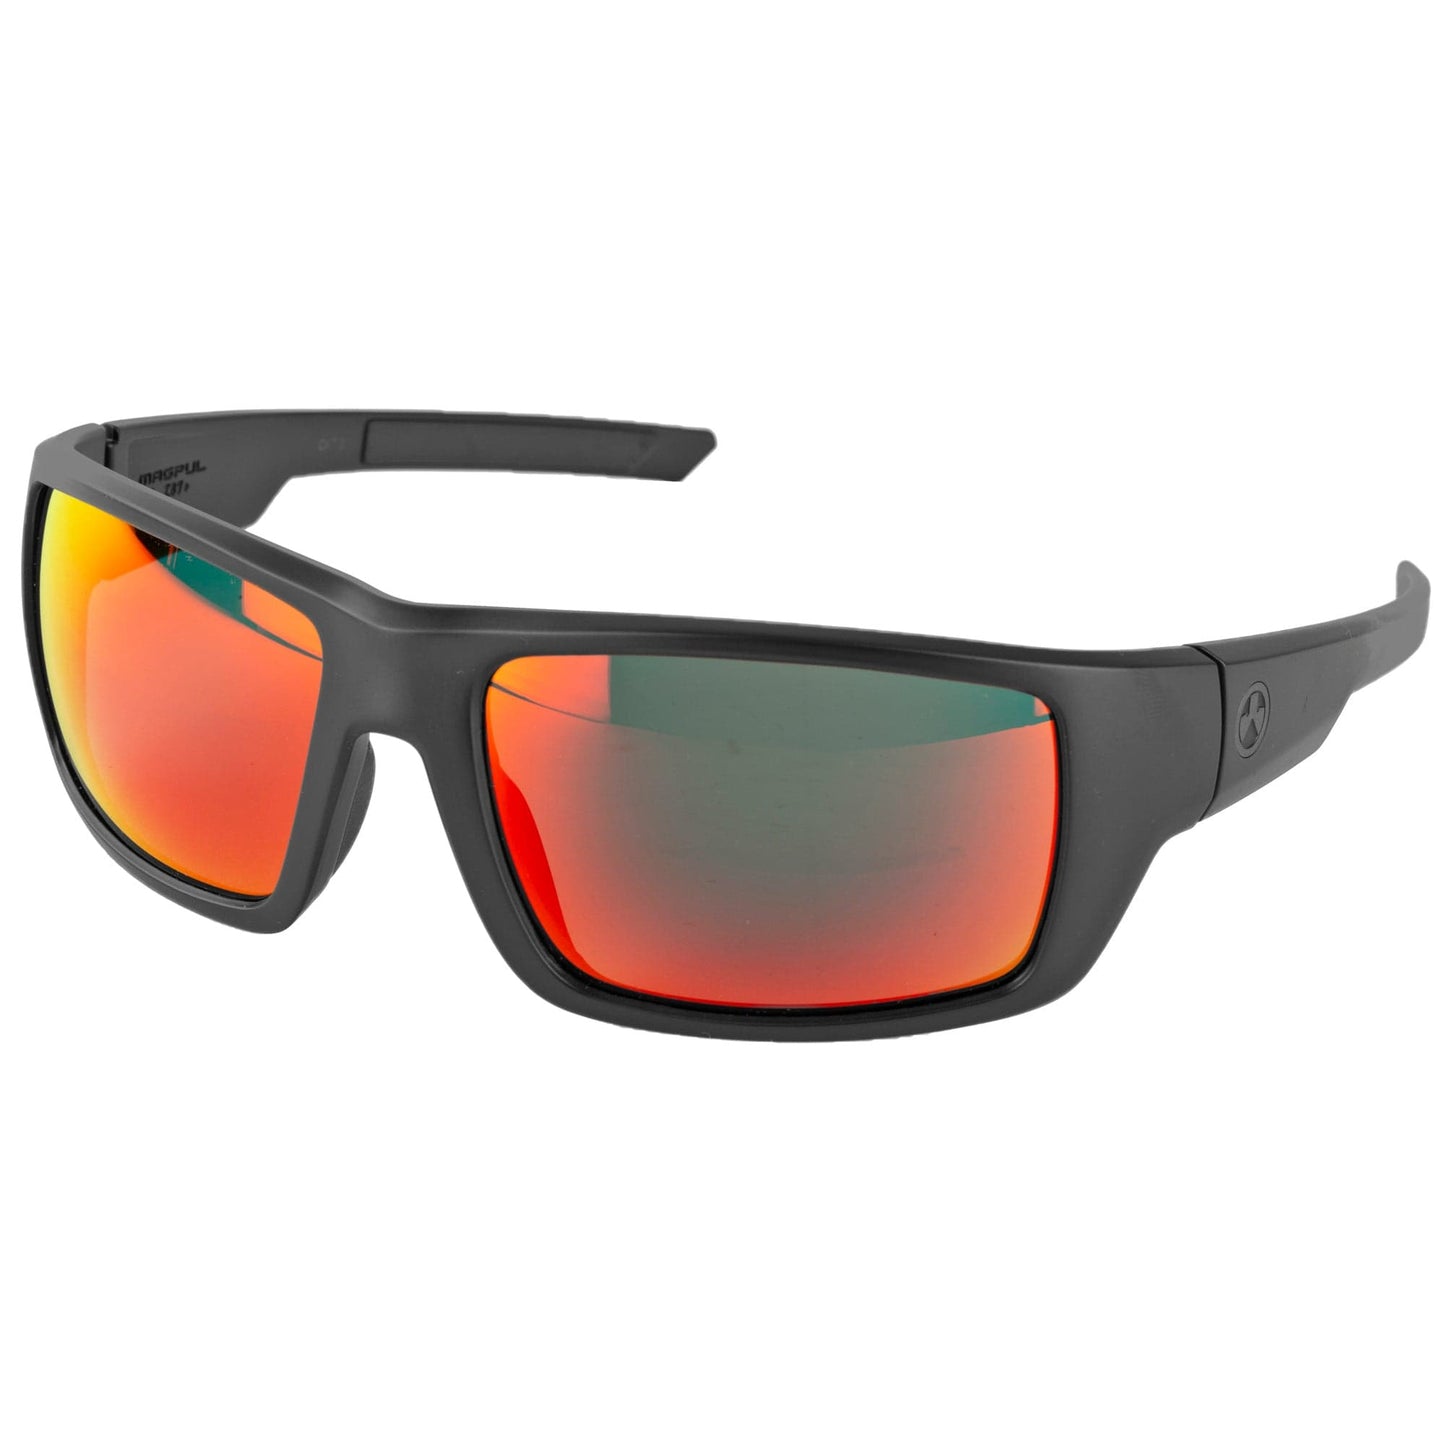 Magpul Industries Corp Apex, Magpul Mag1130-1-001-1140 Apex Eyewear Blk/gry/red by Texas Fowlers